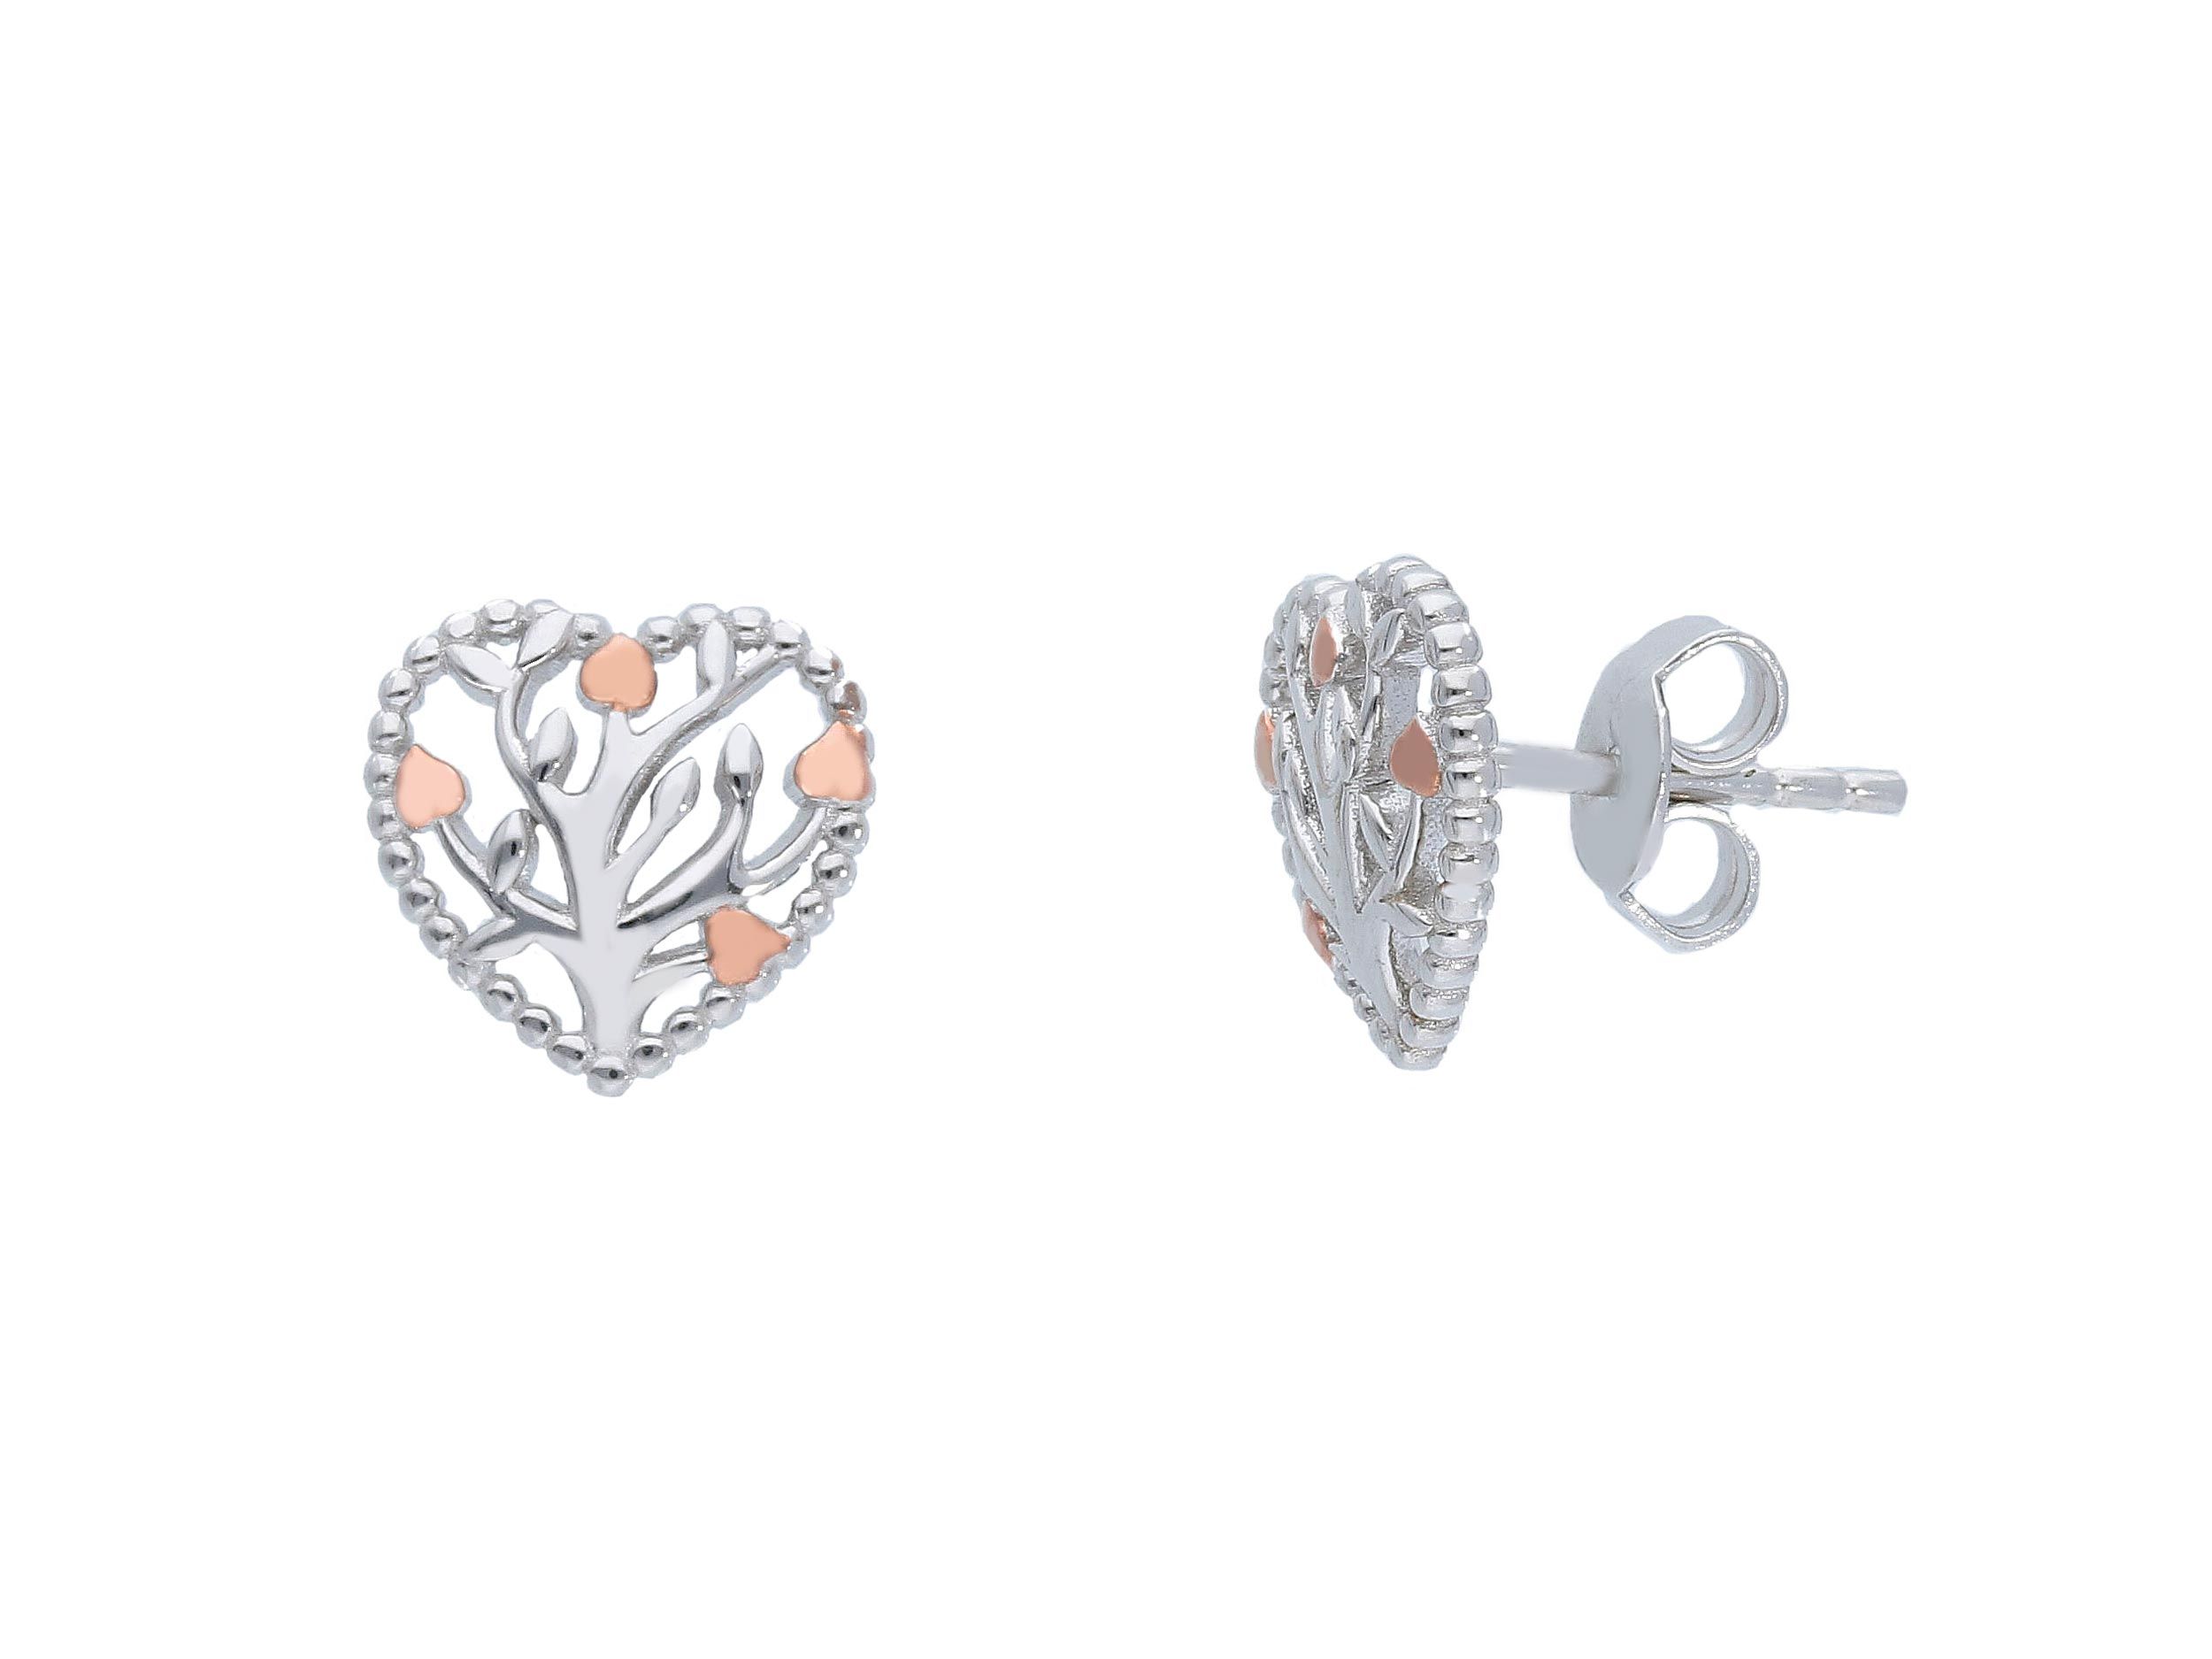  Platinum plated silver 925° earrings (code S249299)